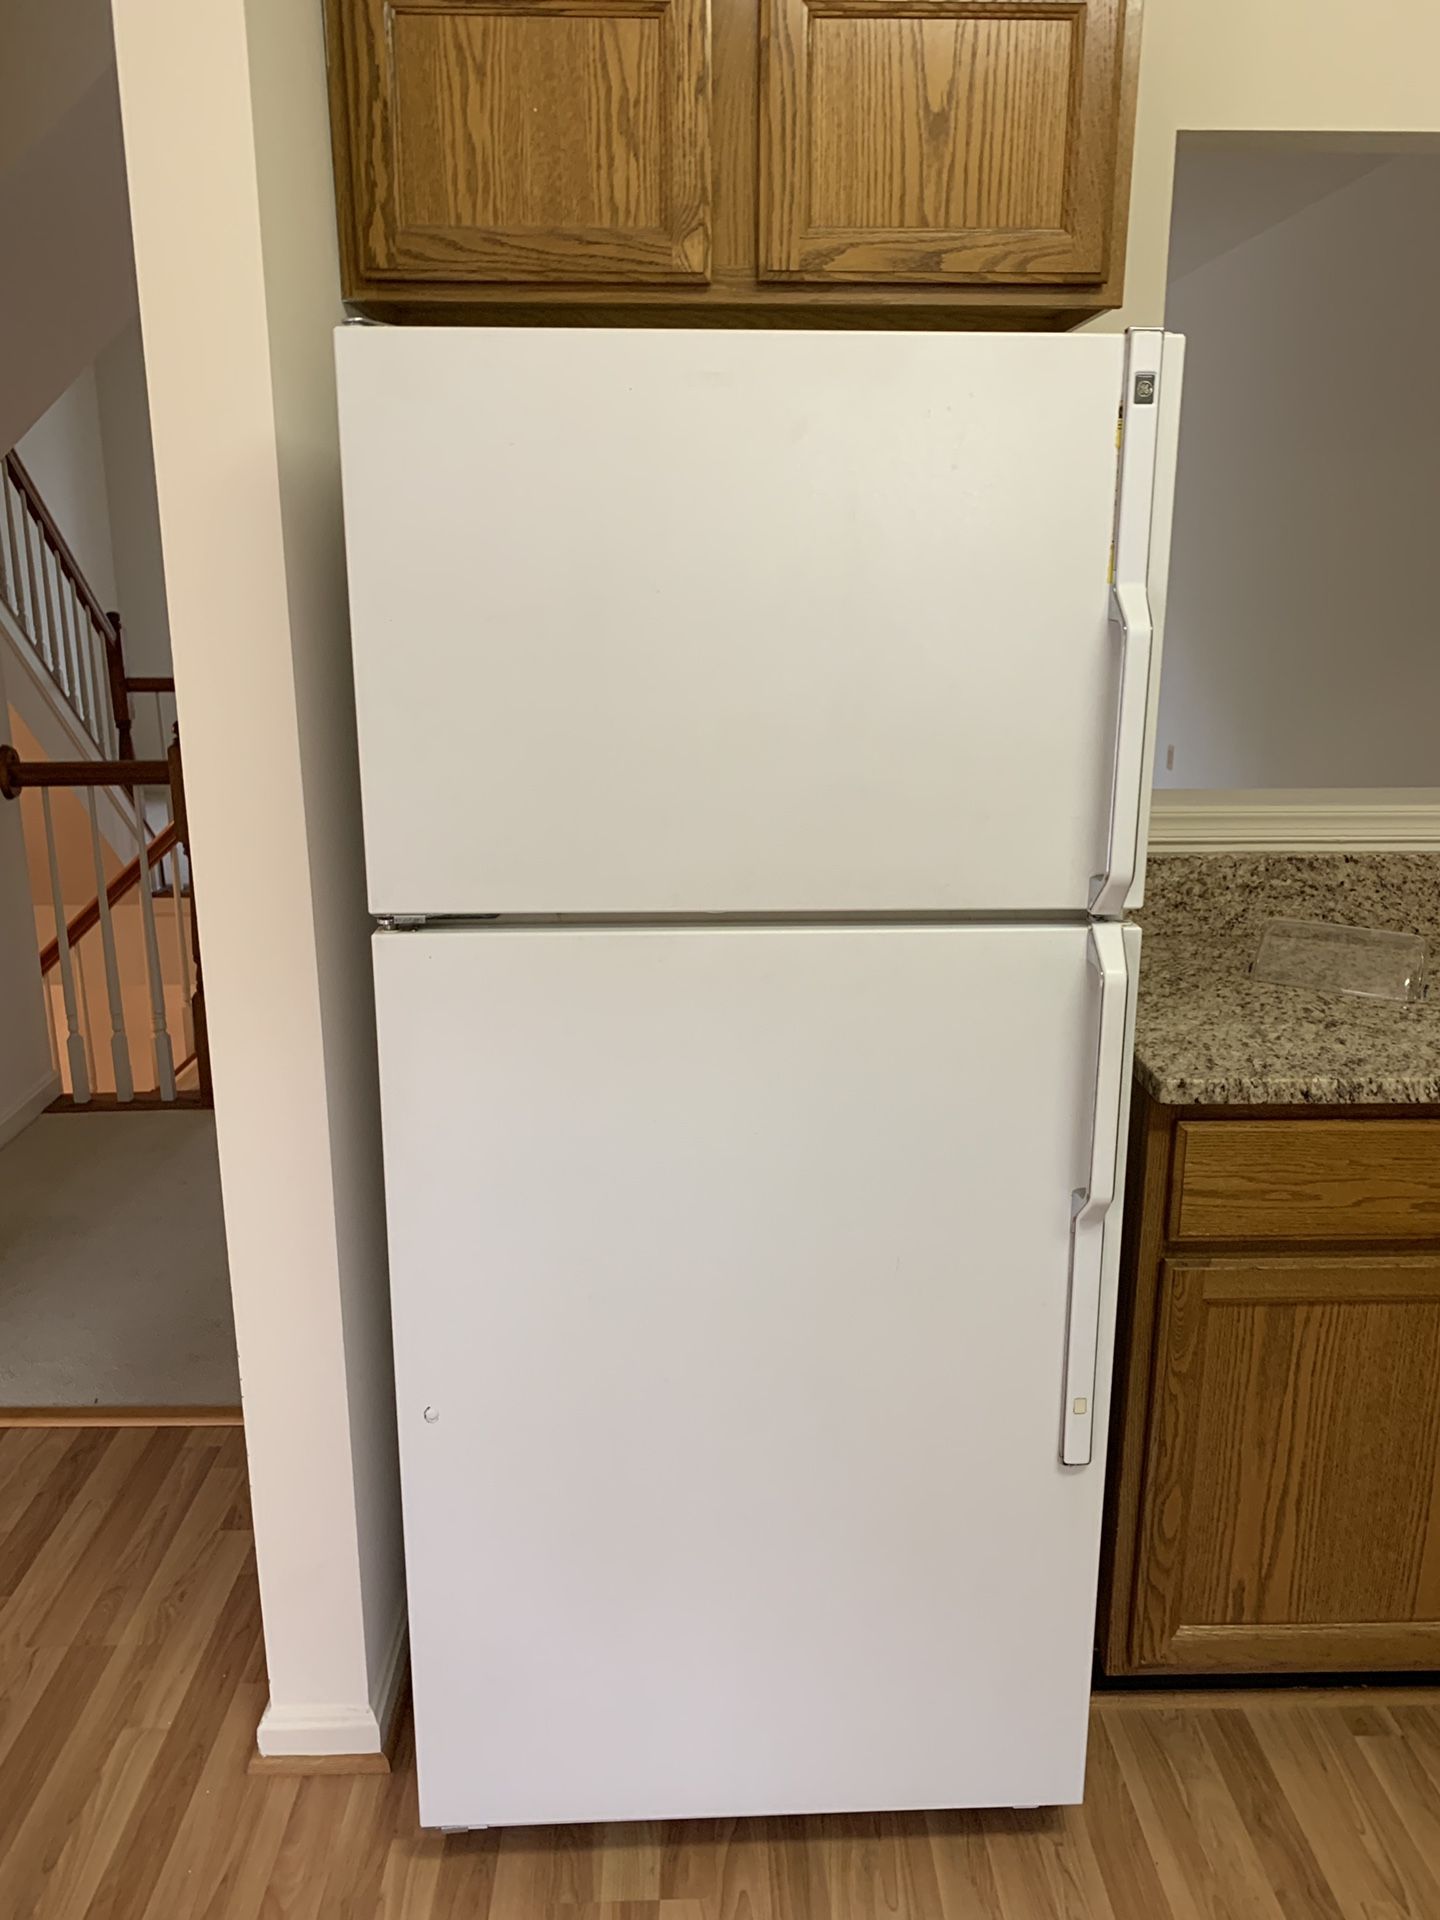 GE used fridge for sale / perfectly working condition